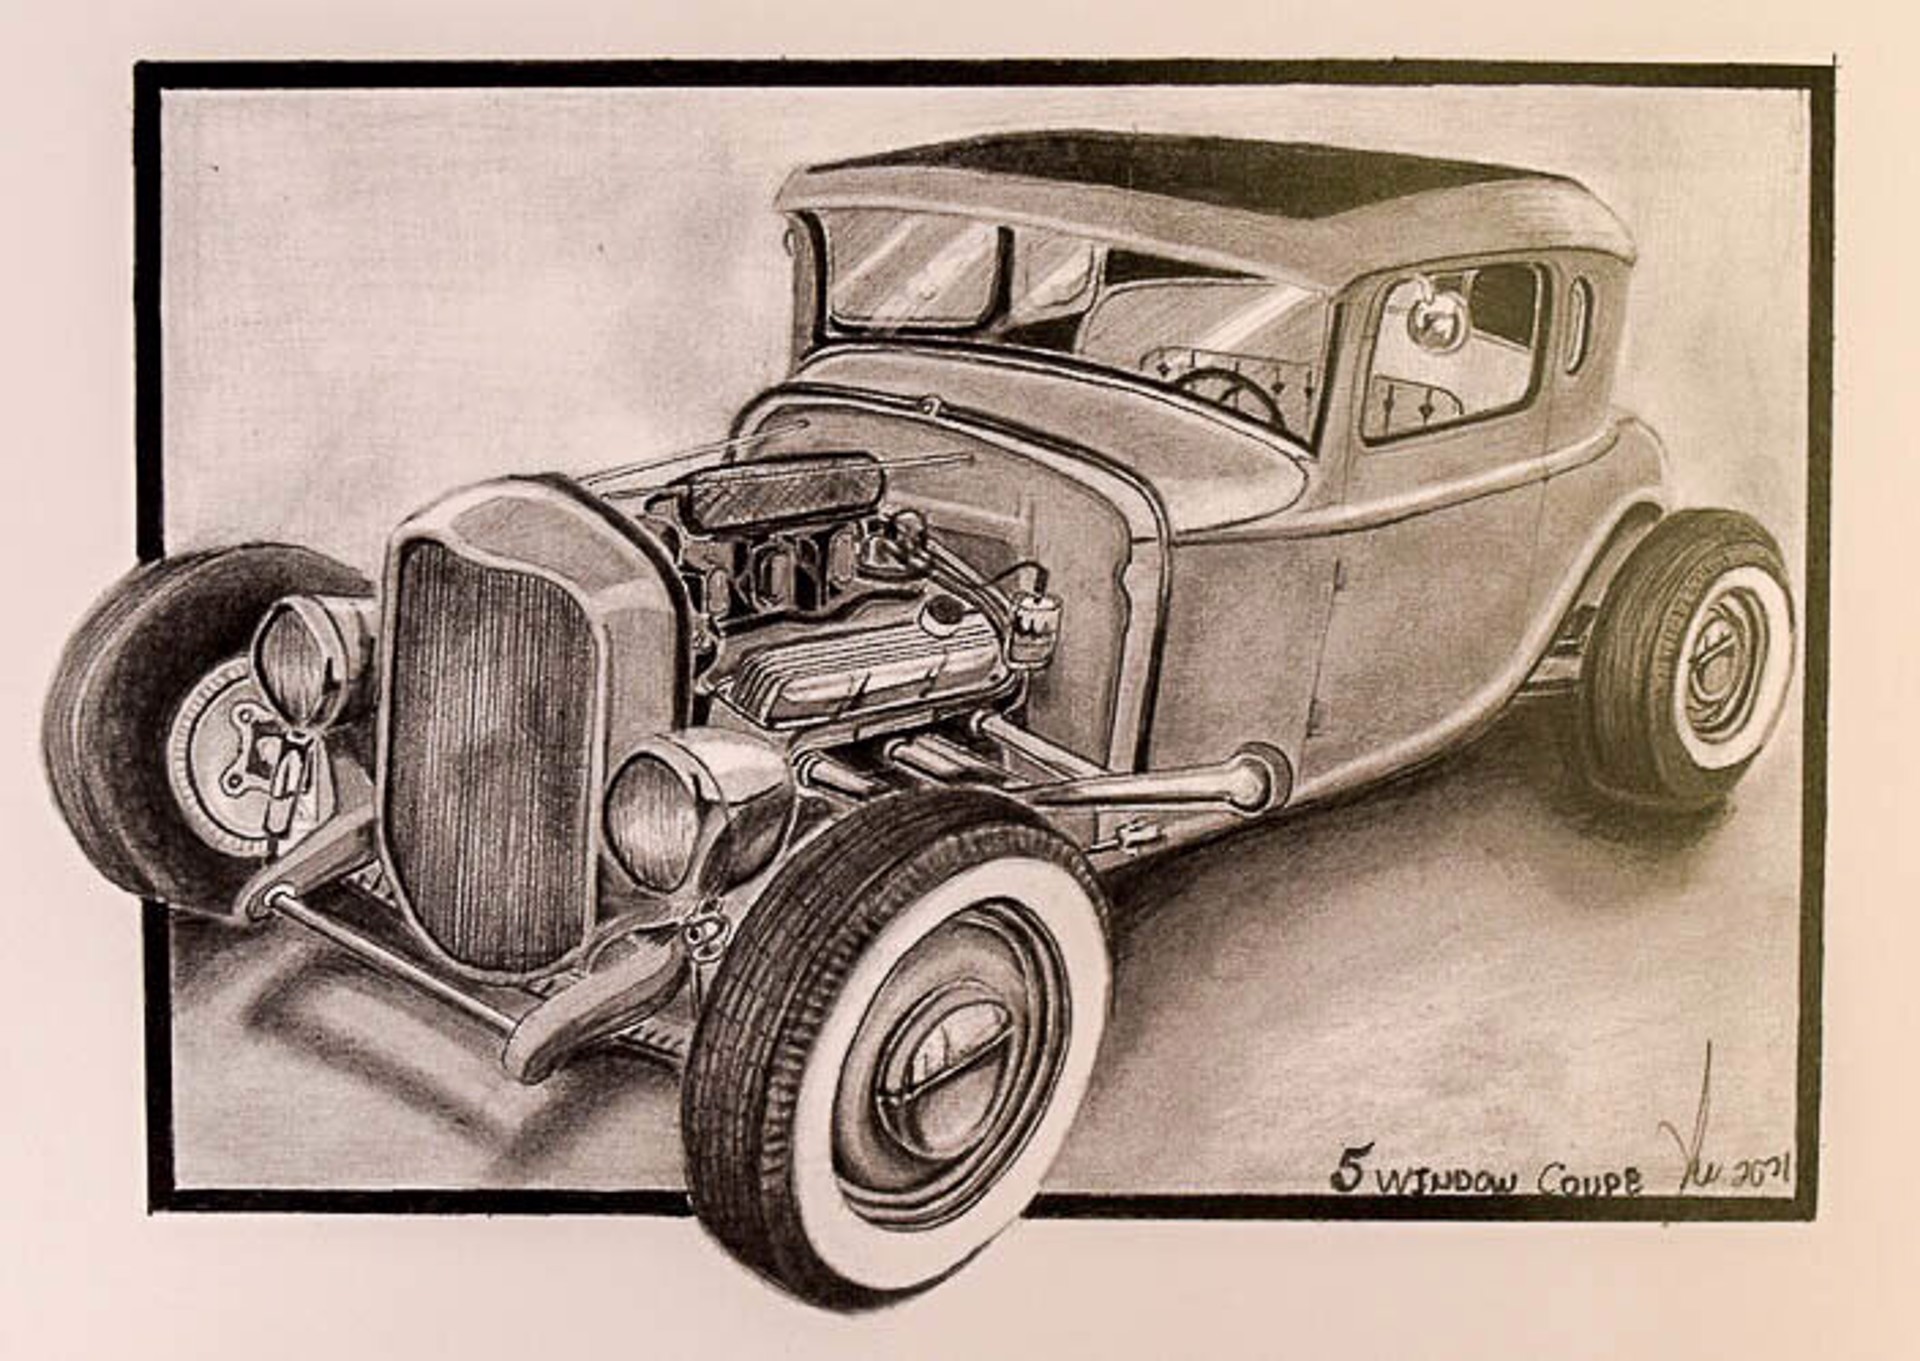 5 Window Coupe by Sully